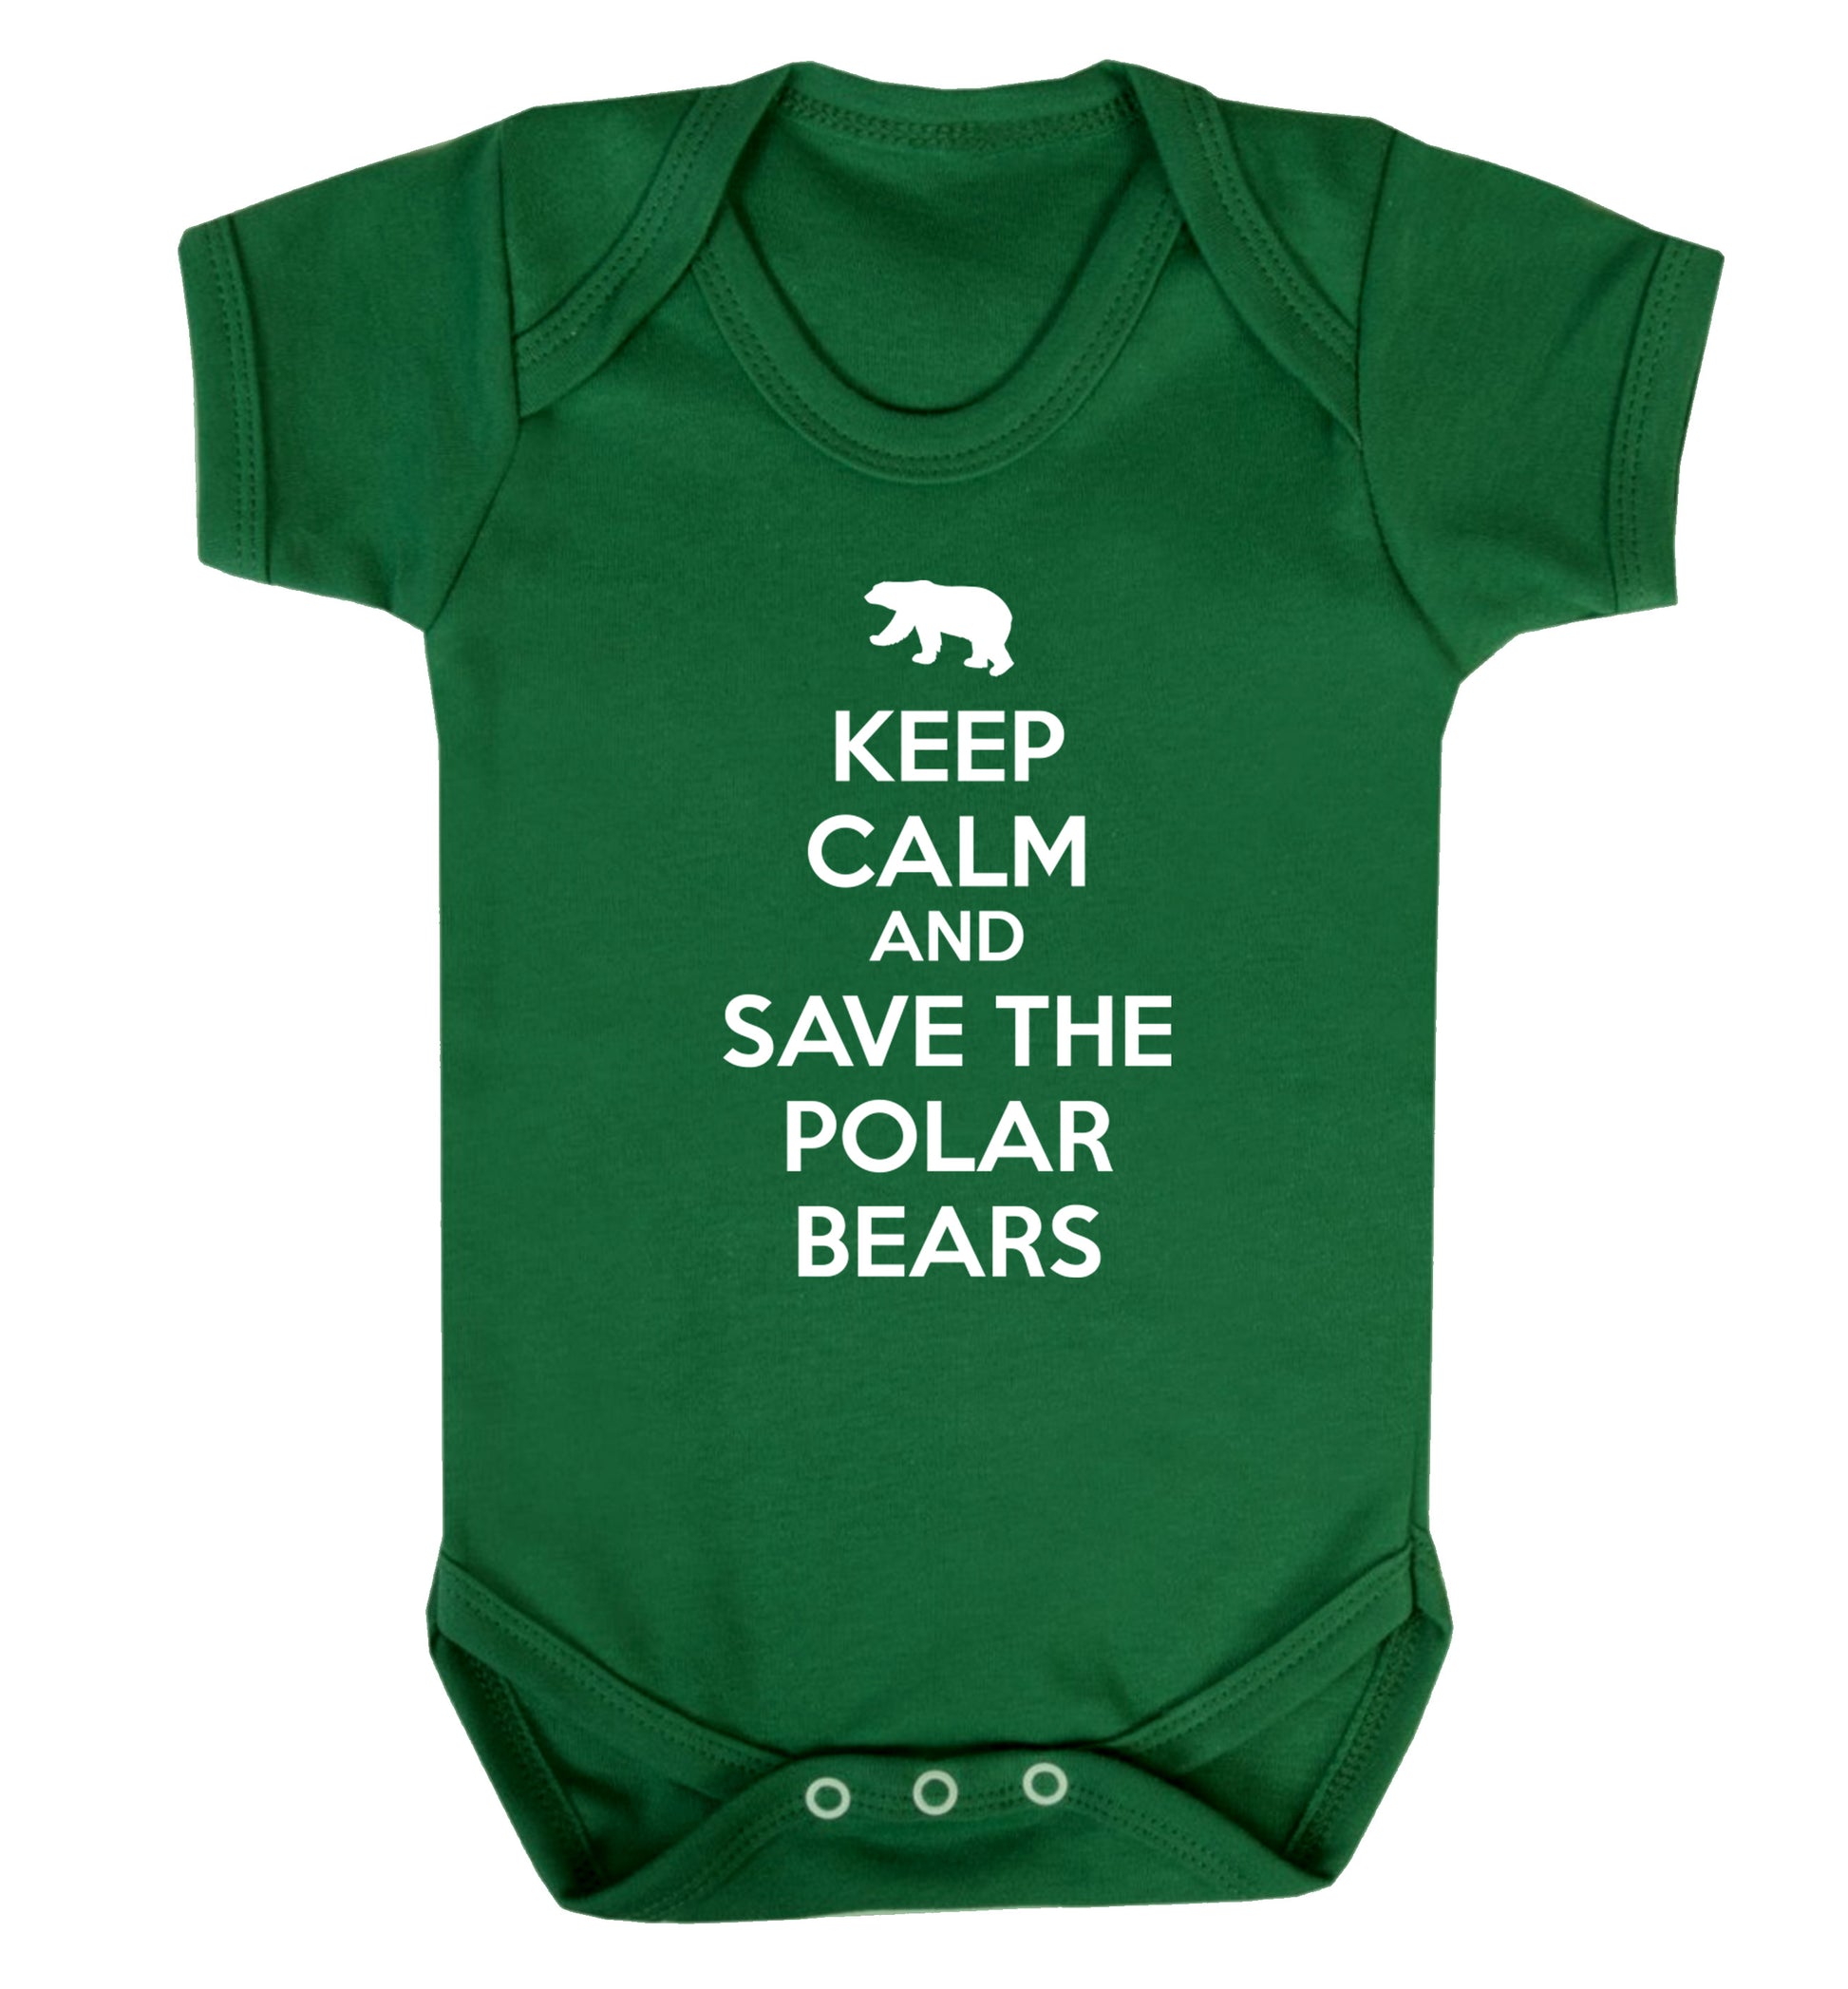 Keep calm and save the polar bears Baby Vest green 18-24 months